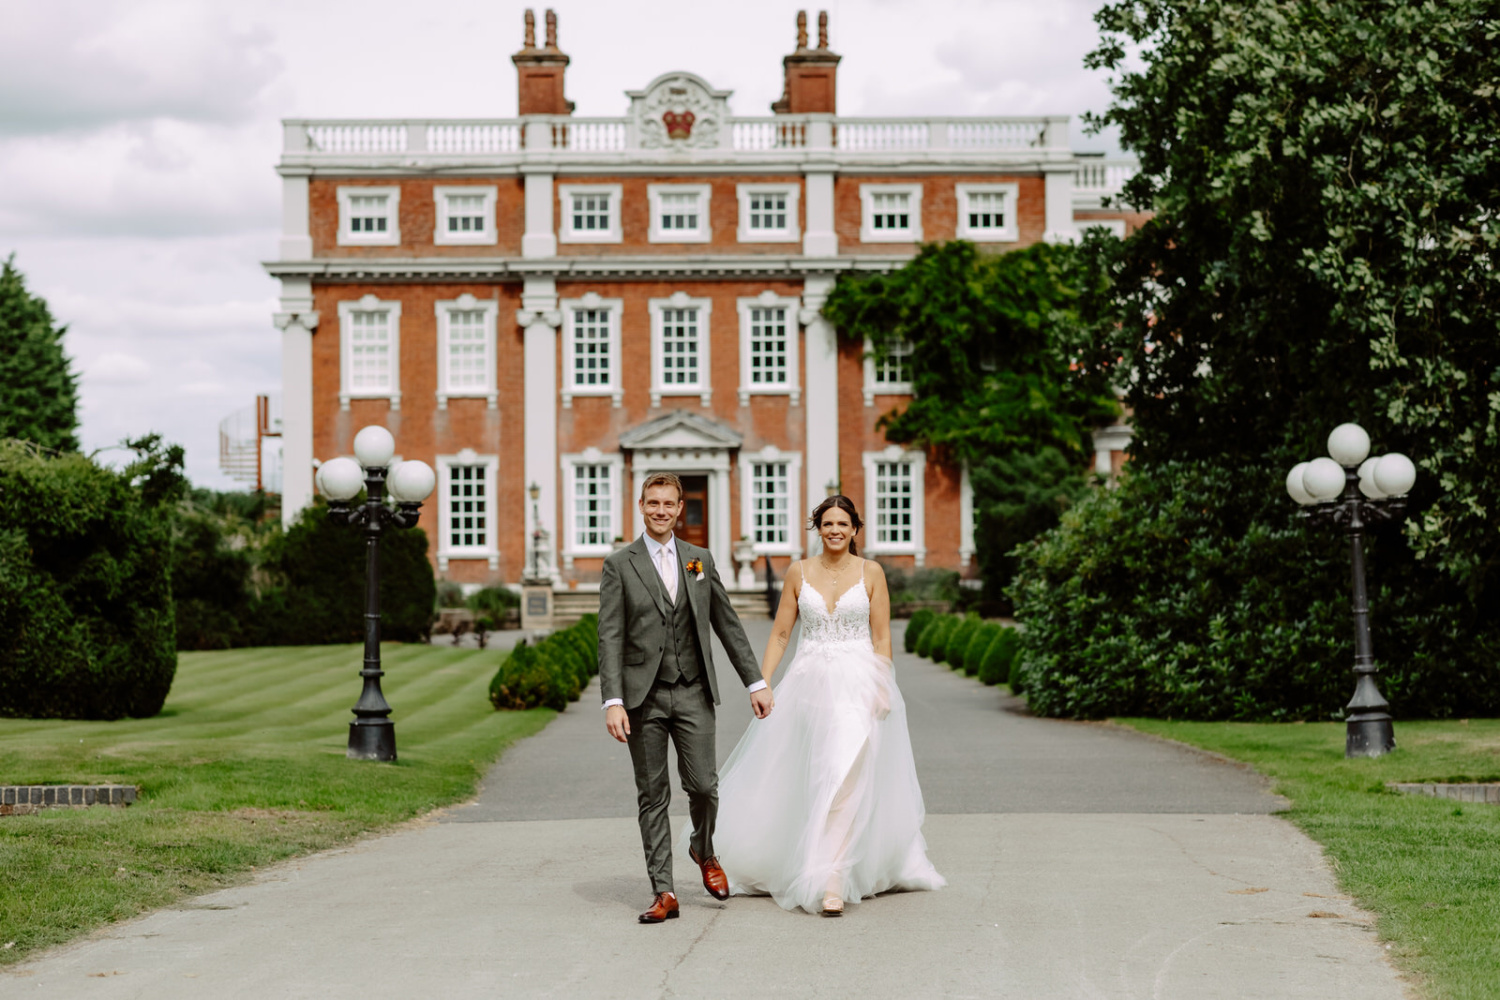 A bride and groom walking in front of a Swinfen Hall.